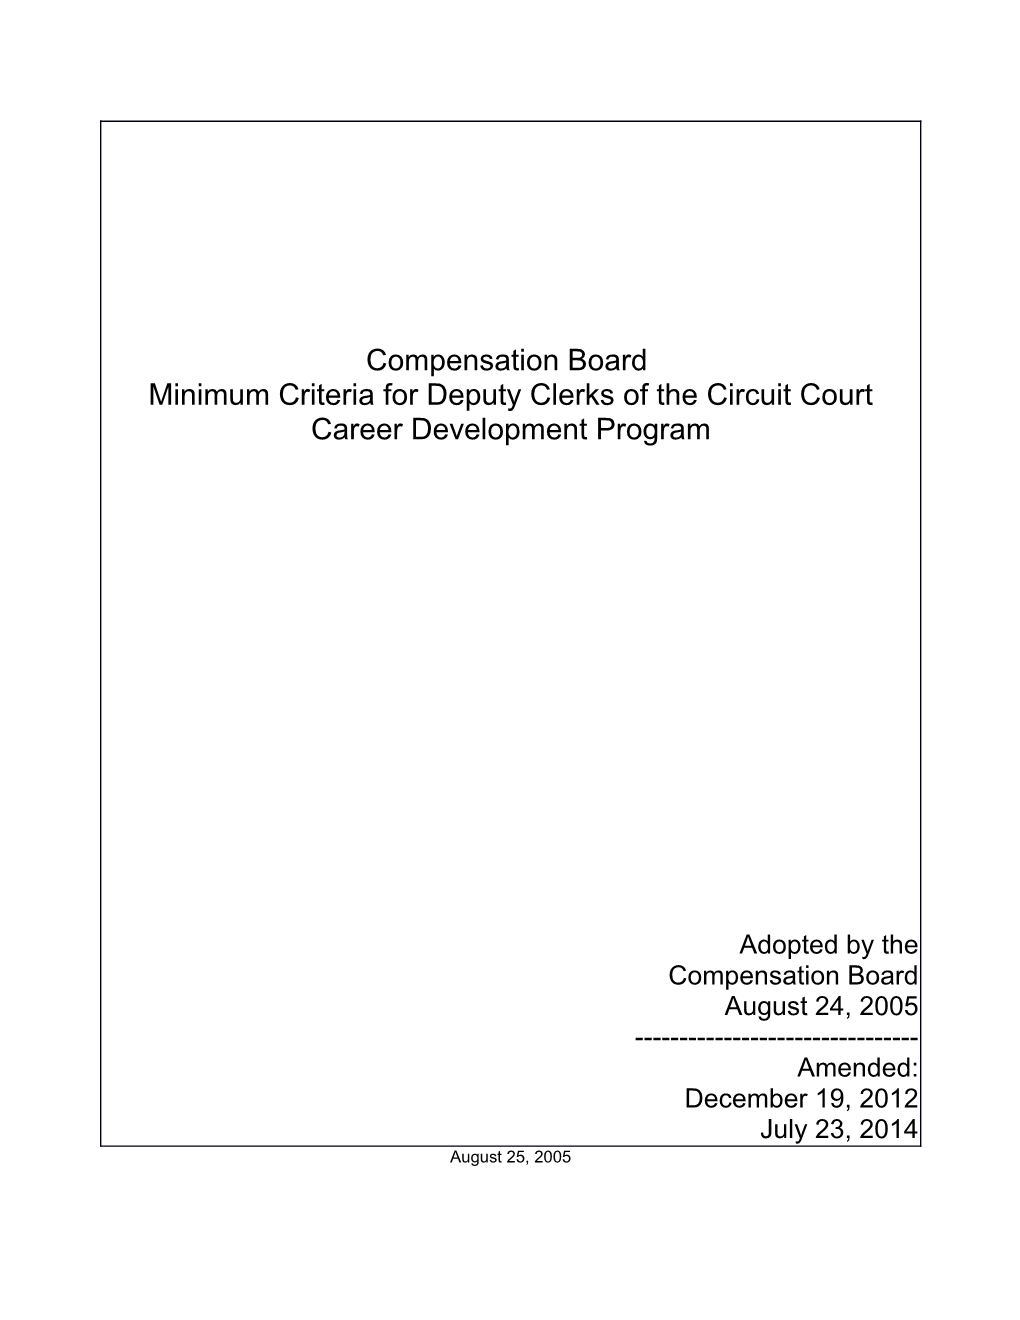 Minimum Criteria for Deputy Clerks of the Circuit Court